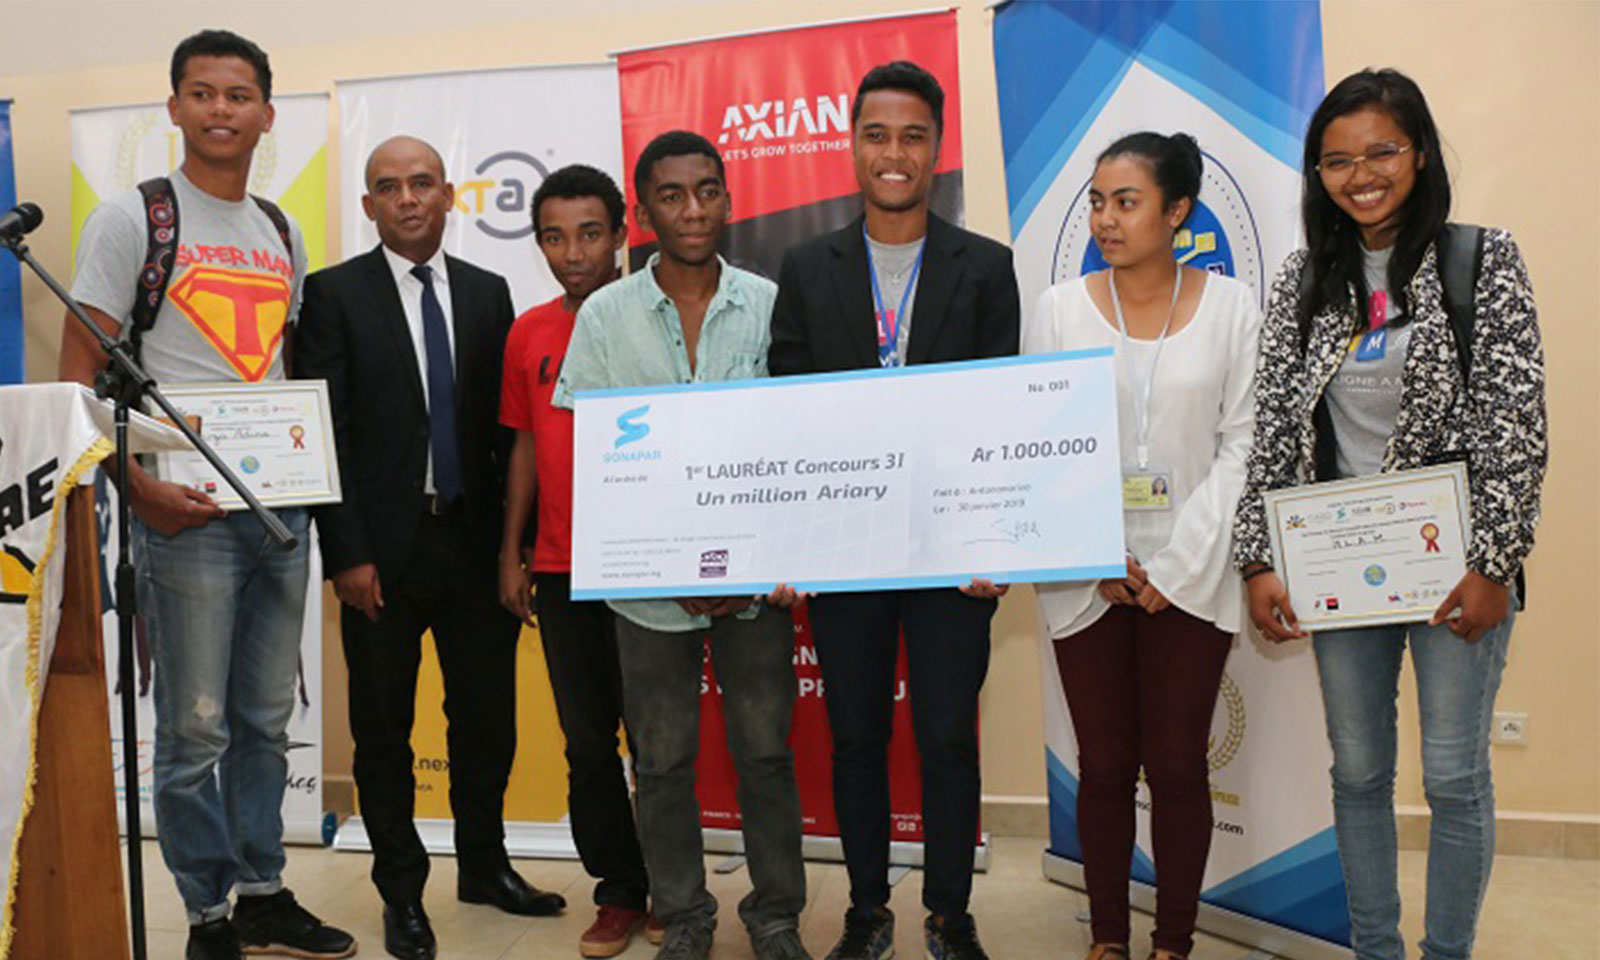 INSCAE Innovation Idea - 17 young Madagascans present their business projects